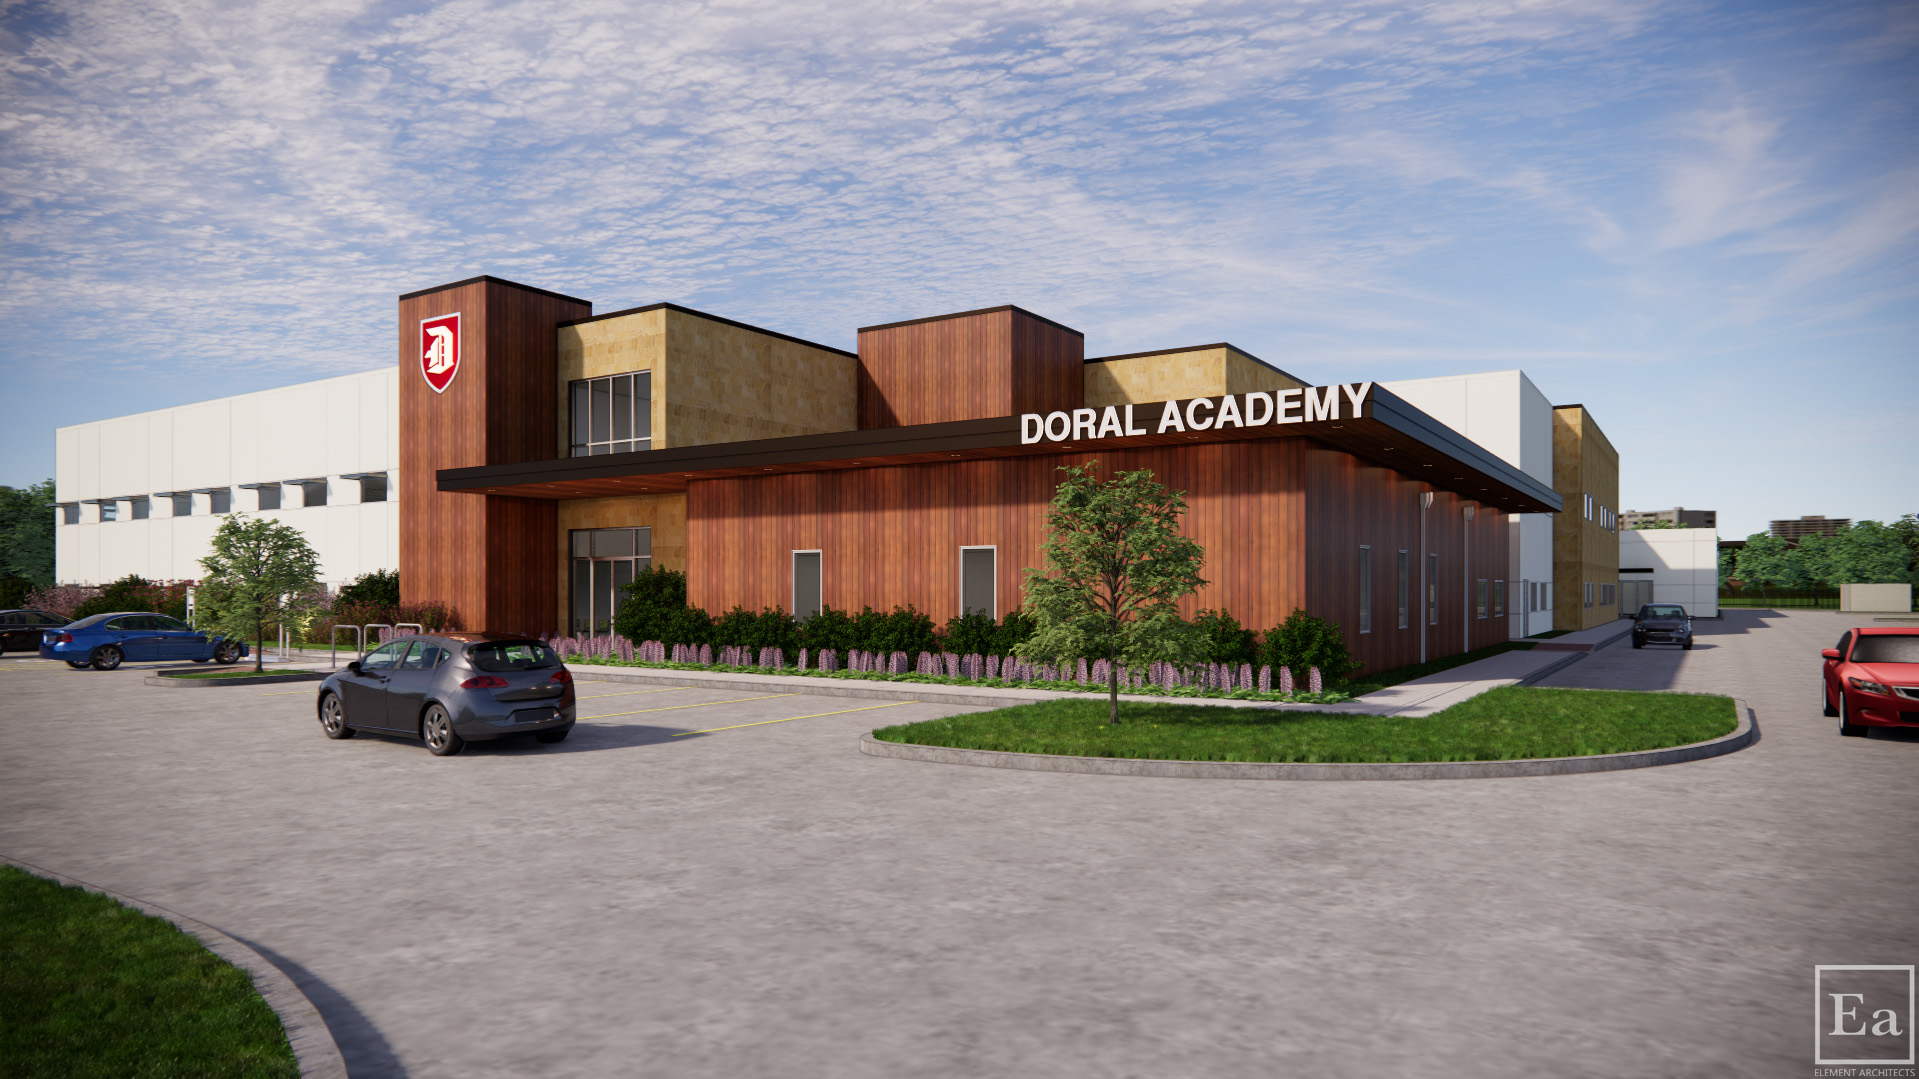 Artist rendering of Doral Acedemy campus front exterior